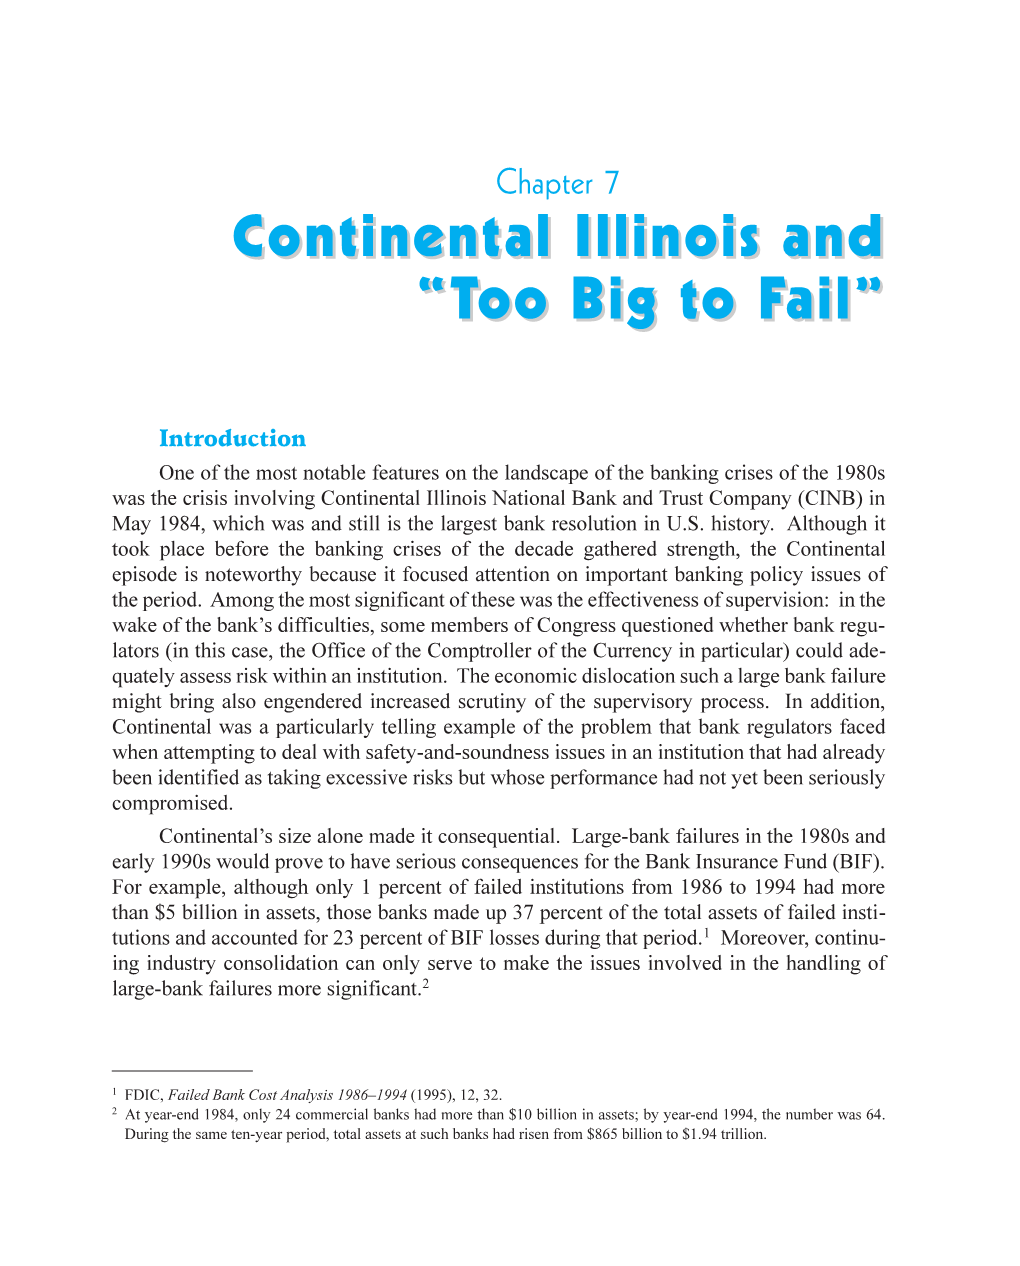 Continental Illinois and "Too Big to Fail"